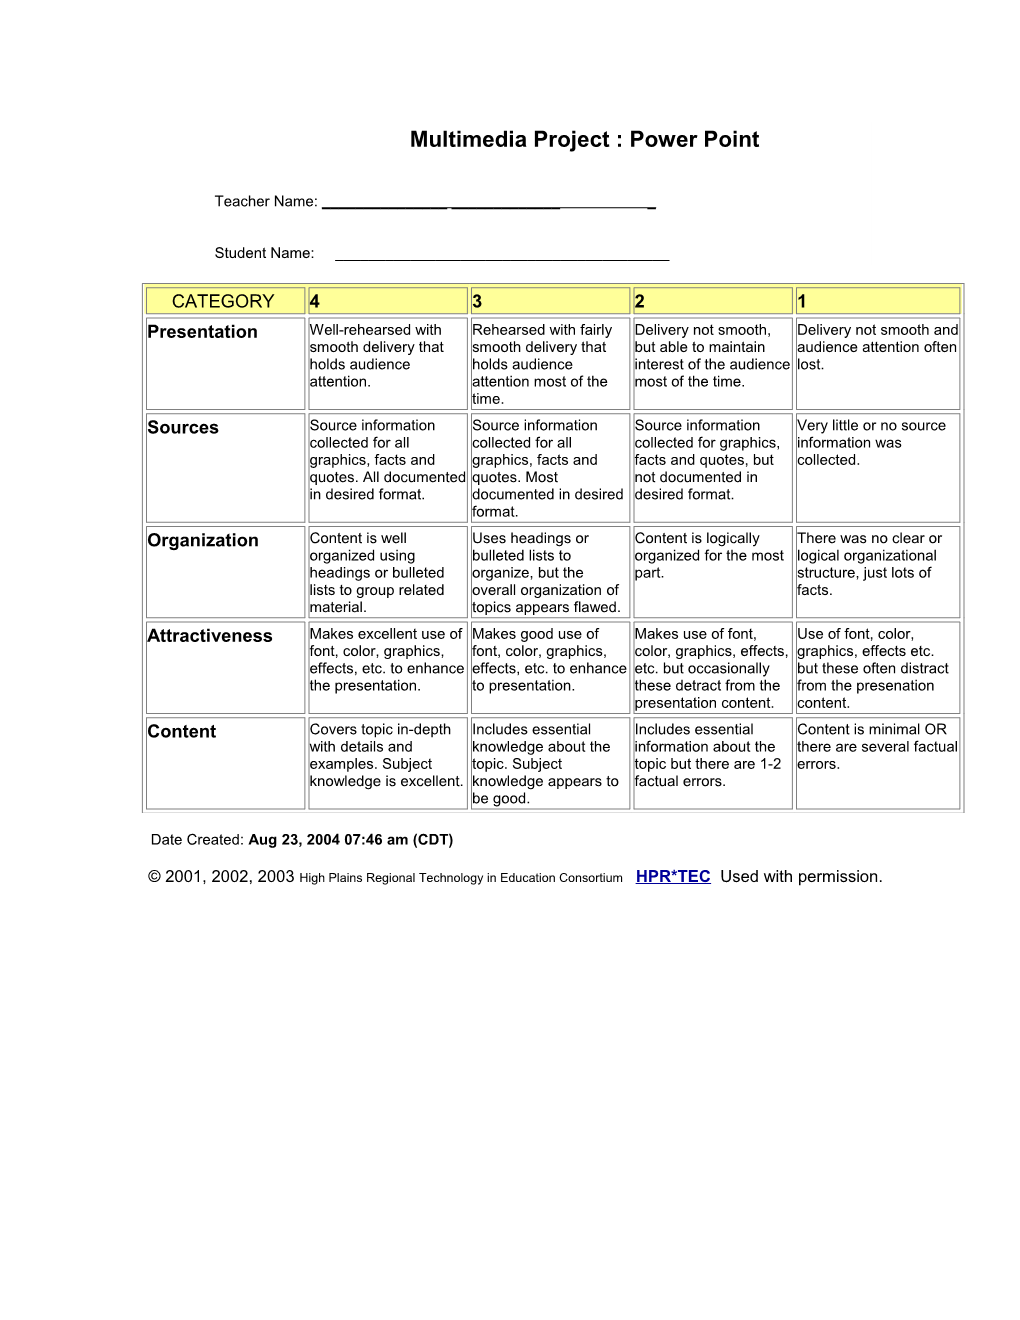 Your Rubric: Multimedia Project : Power Point